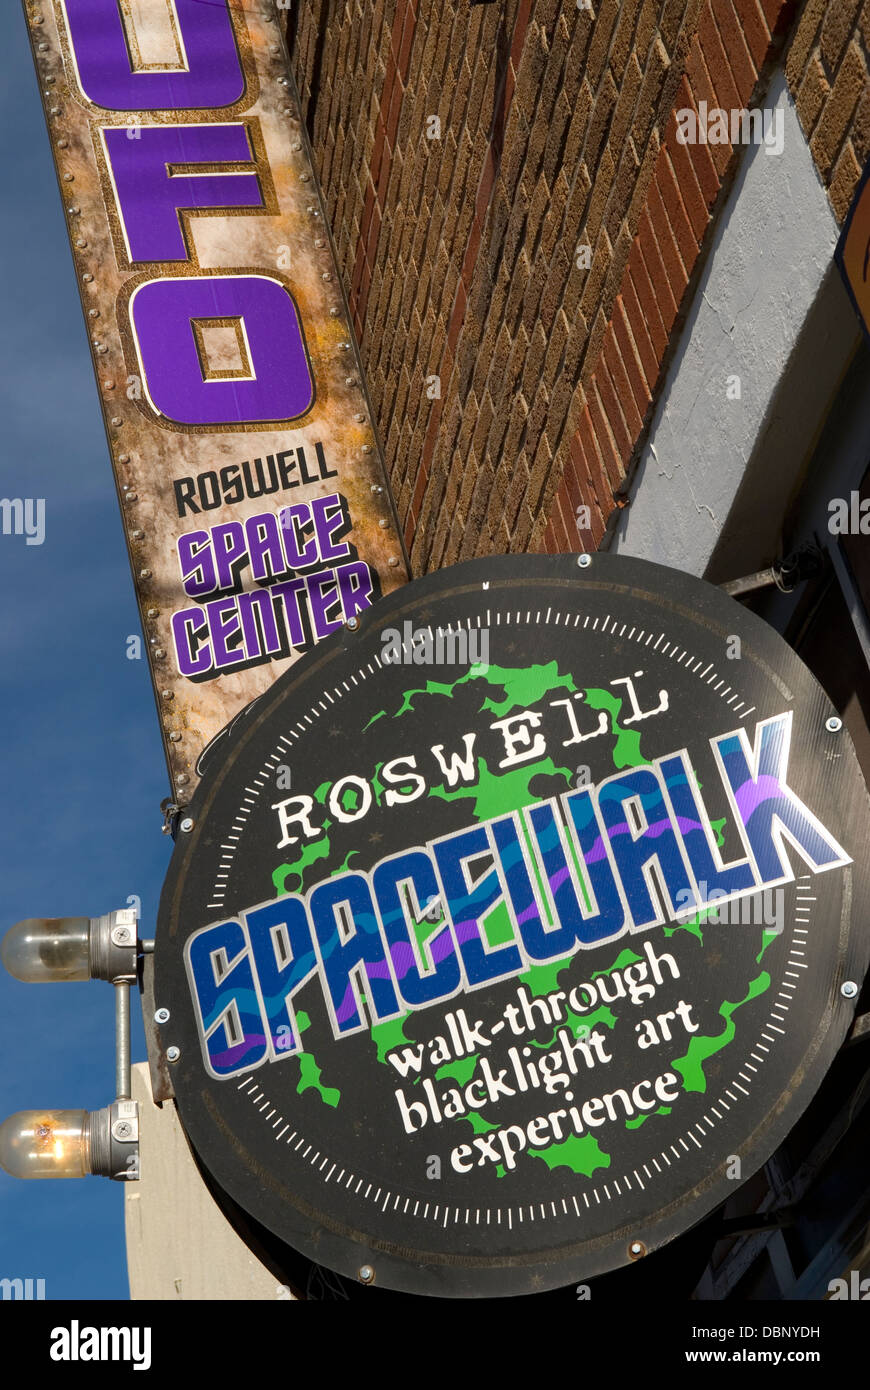 Roswell Spacewalk sign New Mexico USA. Stock Photo